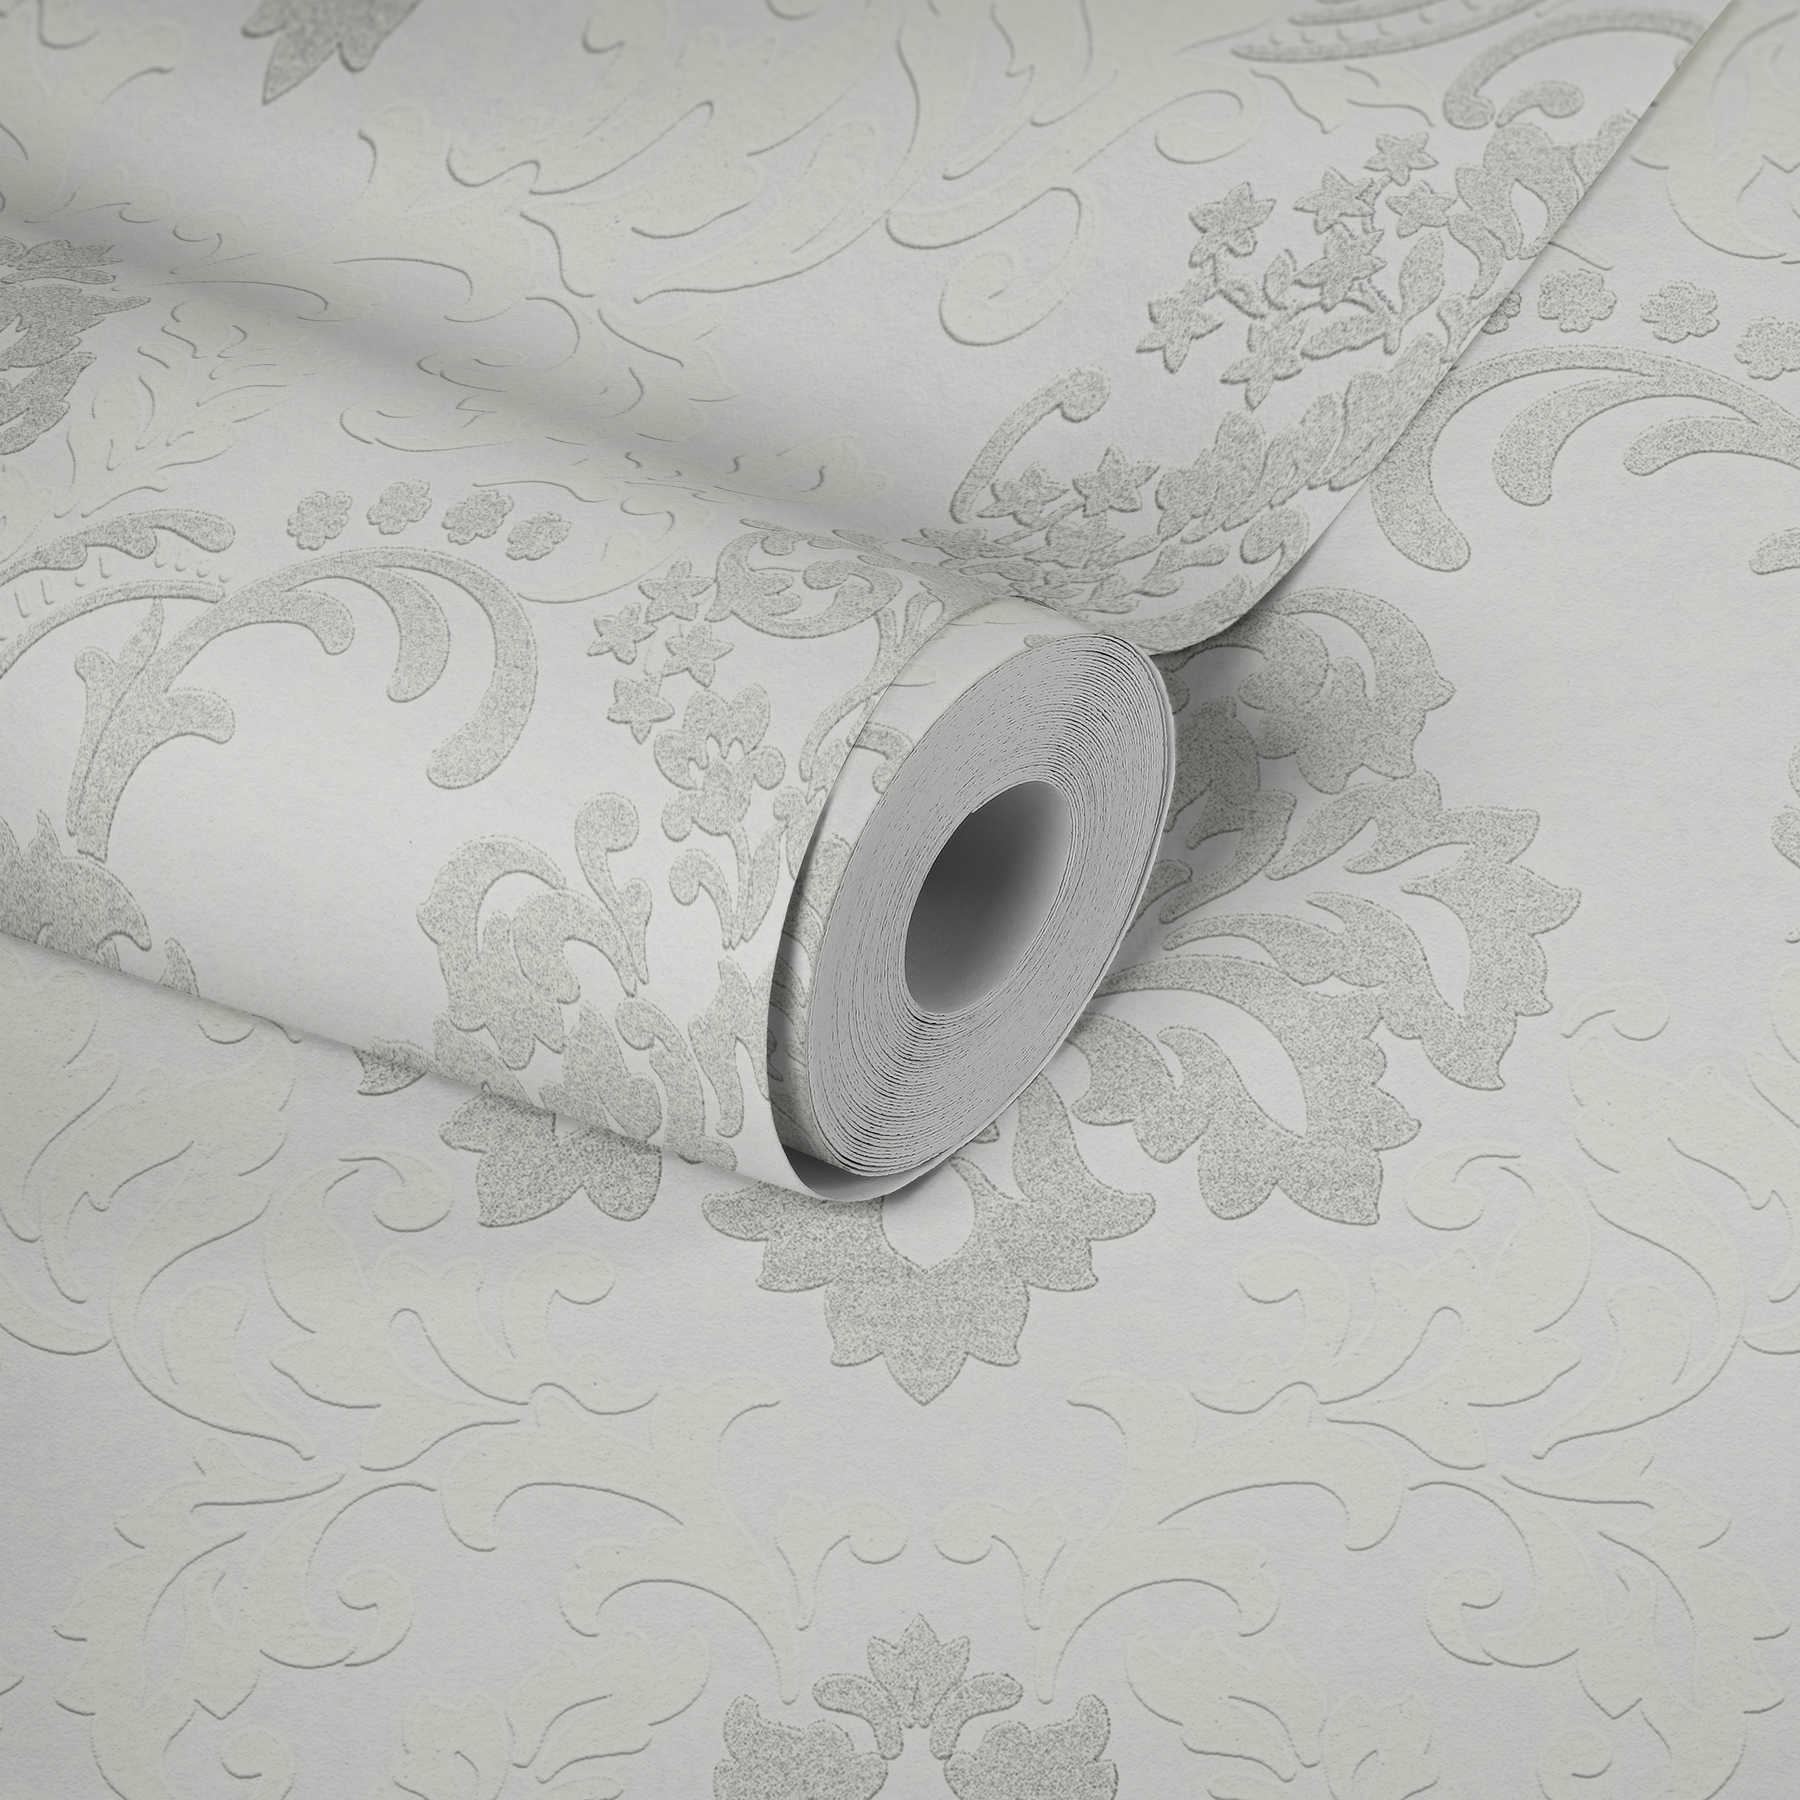             Baroque wallpaper with glitter effect - white
        